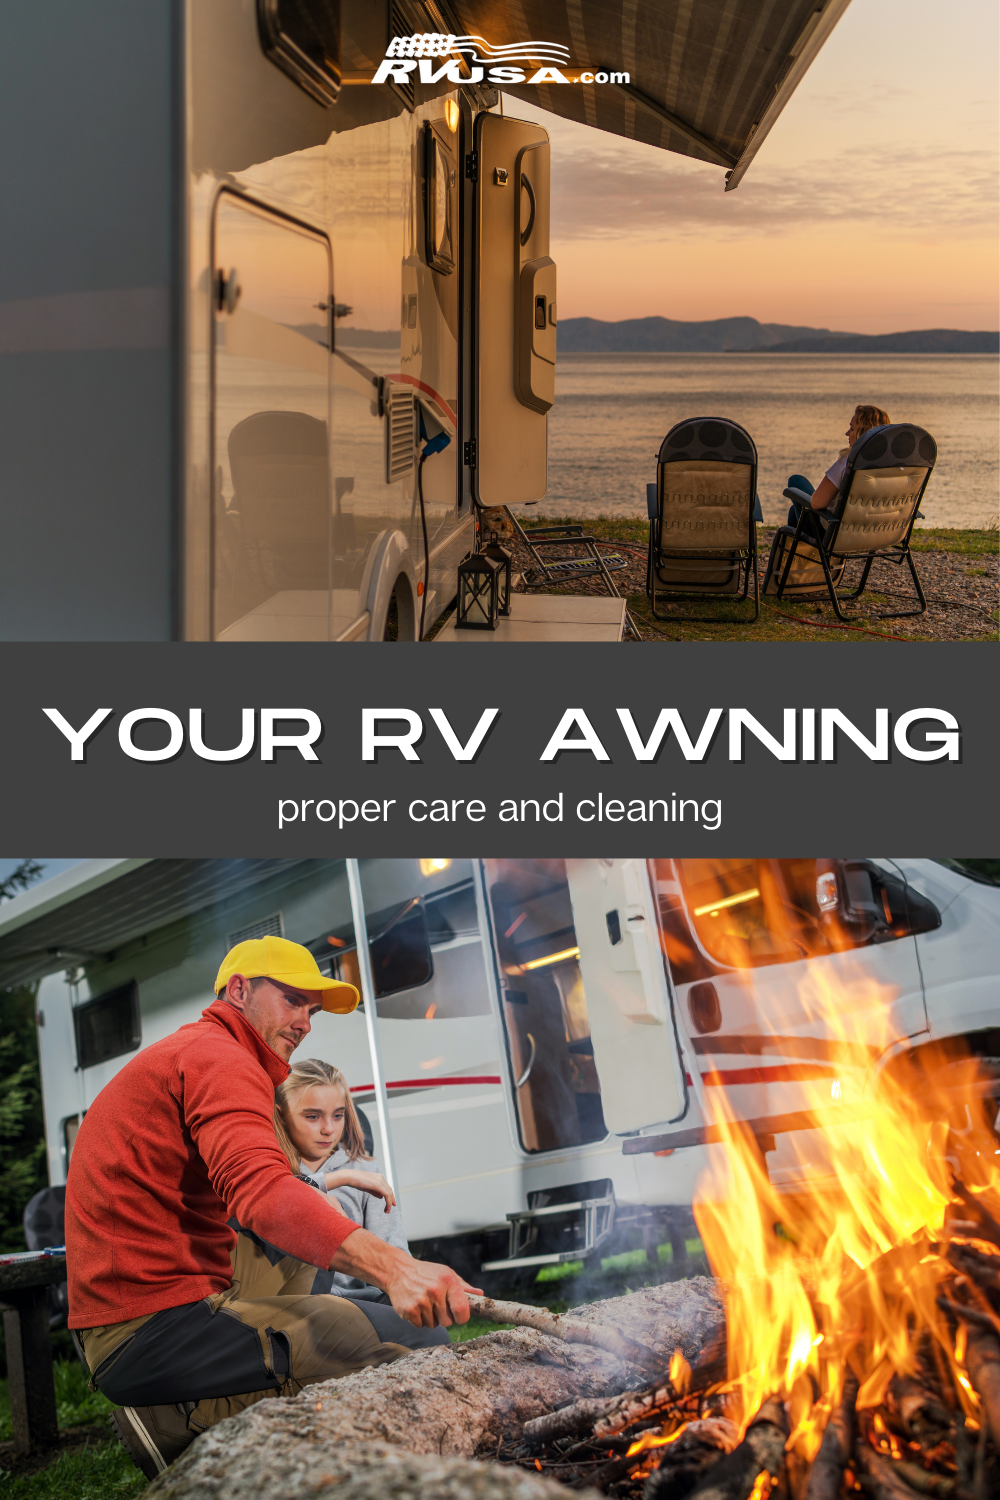 Two photos of RV awning care with the text "Your RV Awning: proper care and cleaning"